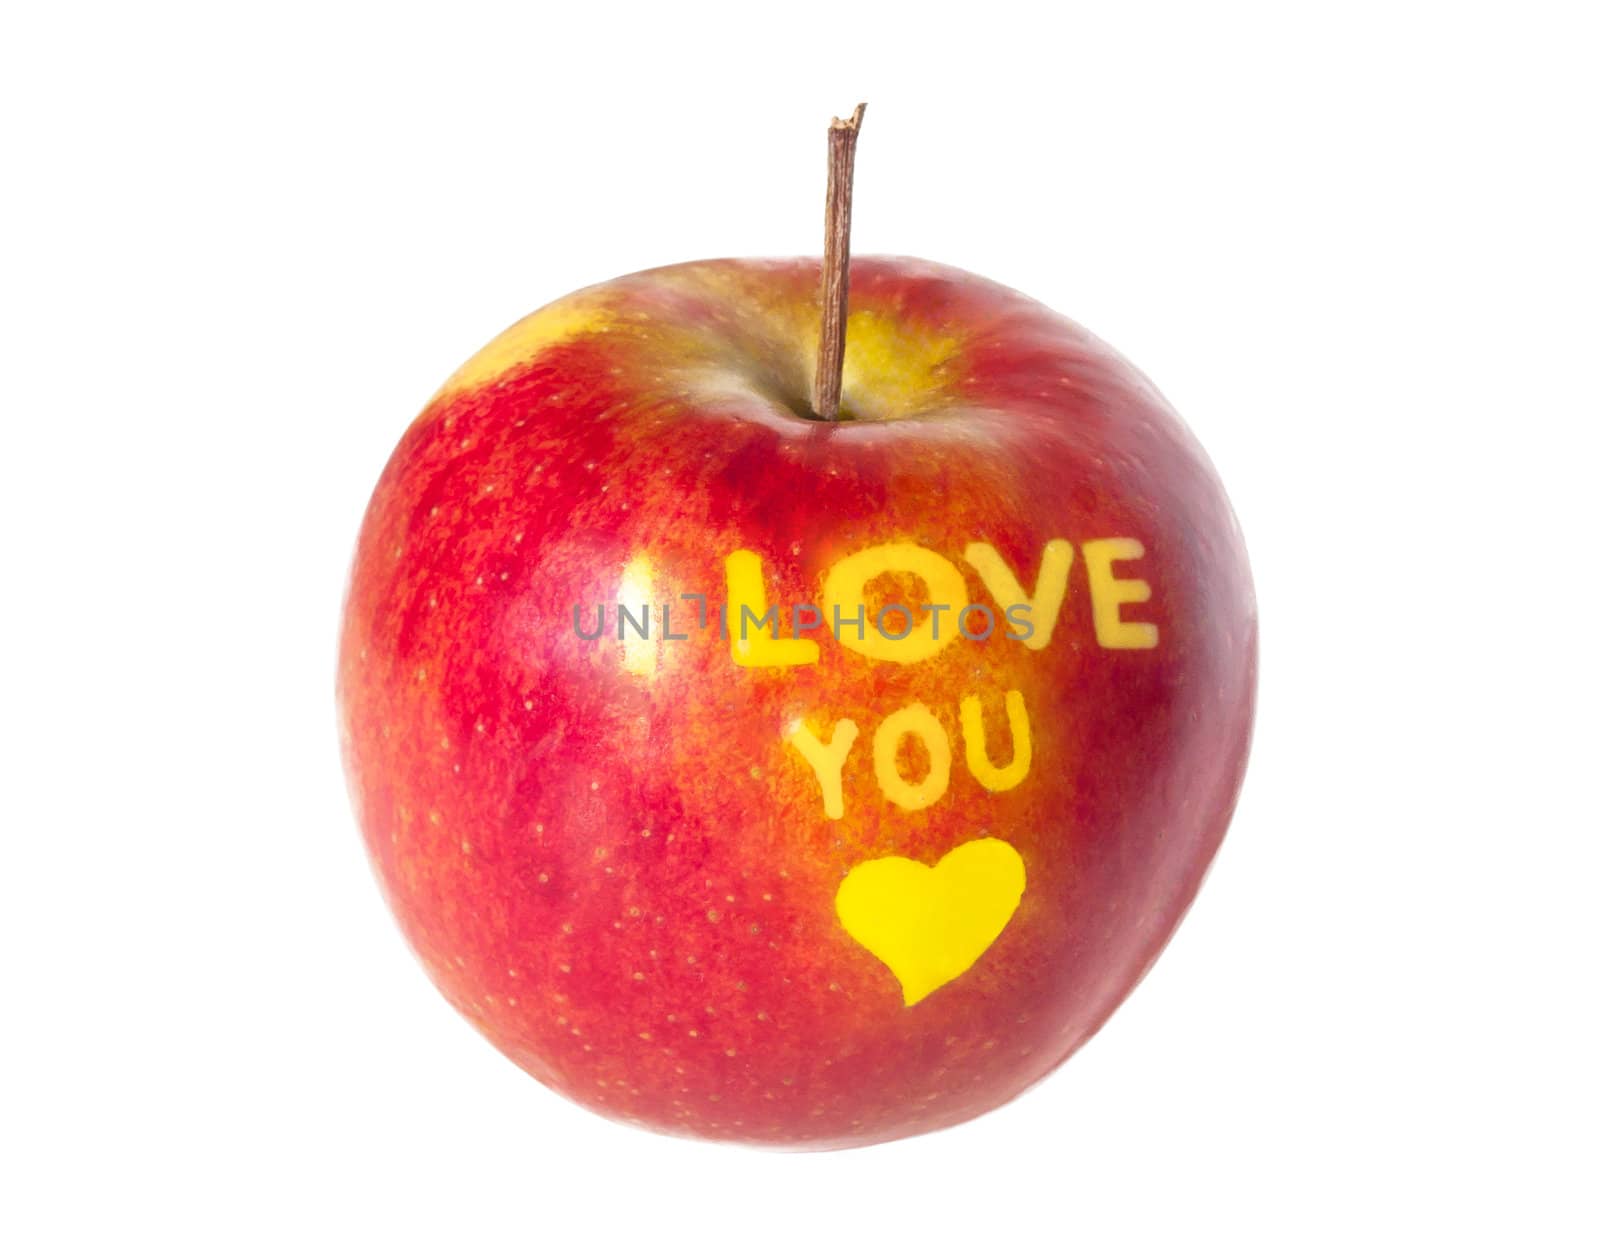 Apple with an inscription "I LOVE YOU". Happy Valentine's Day. by NickNick